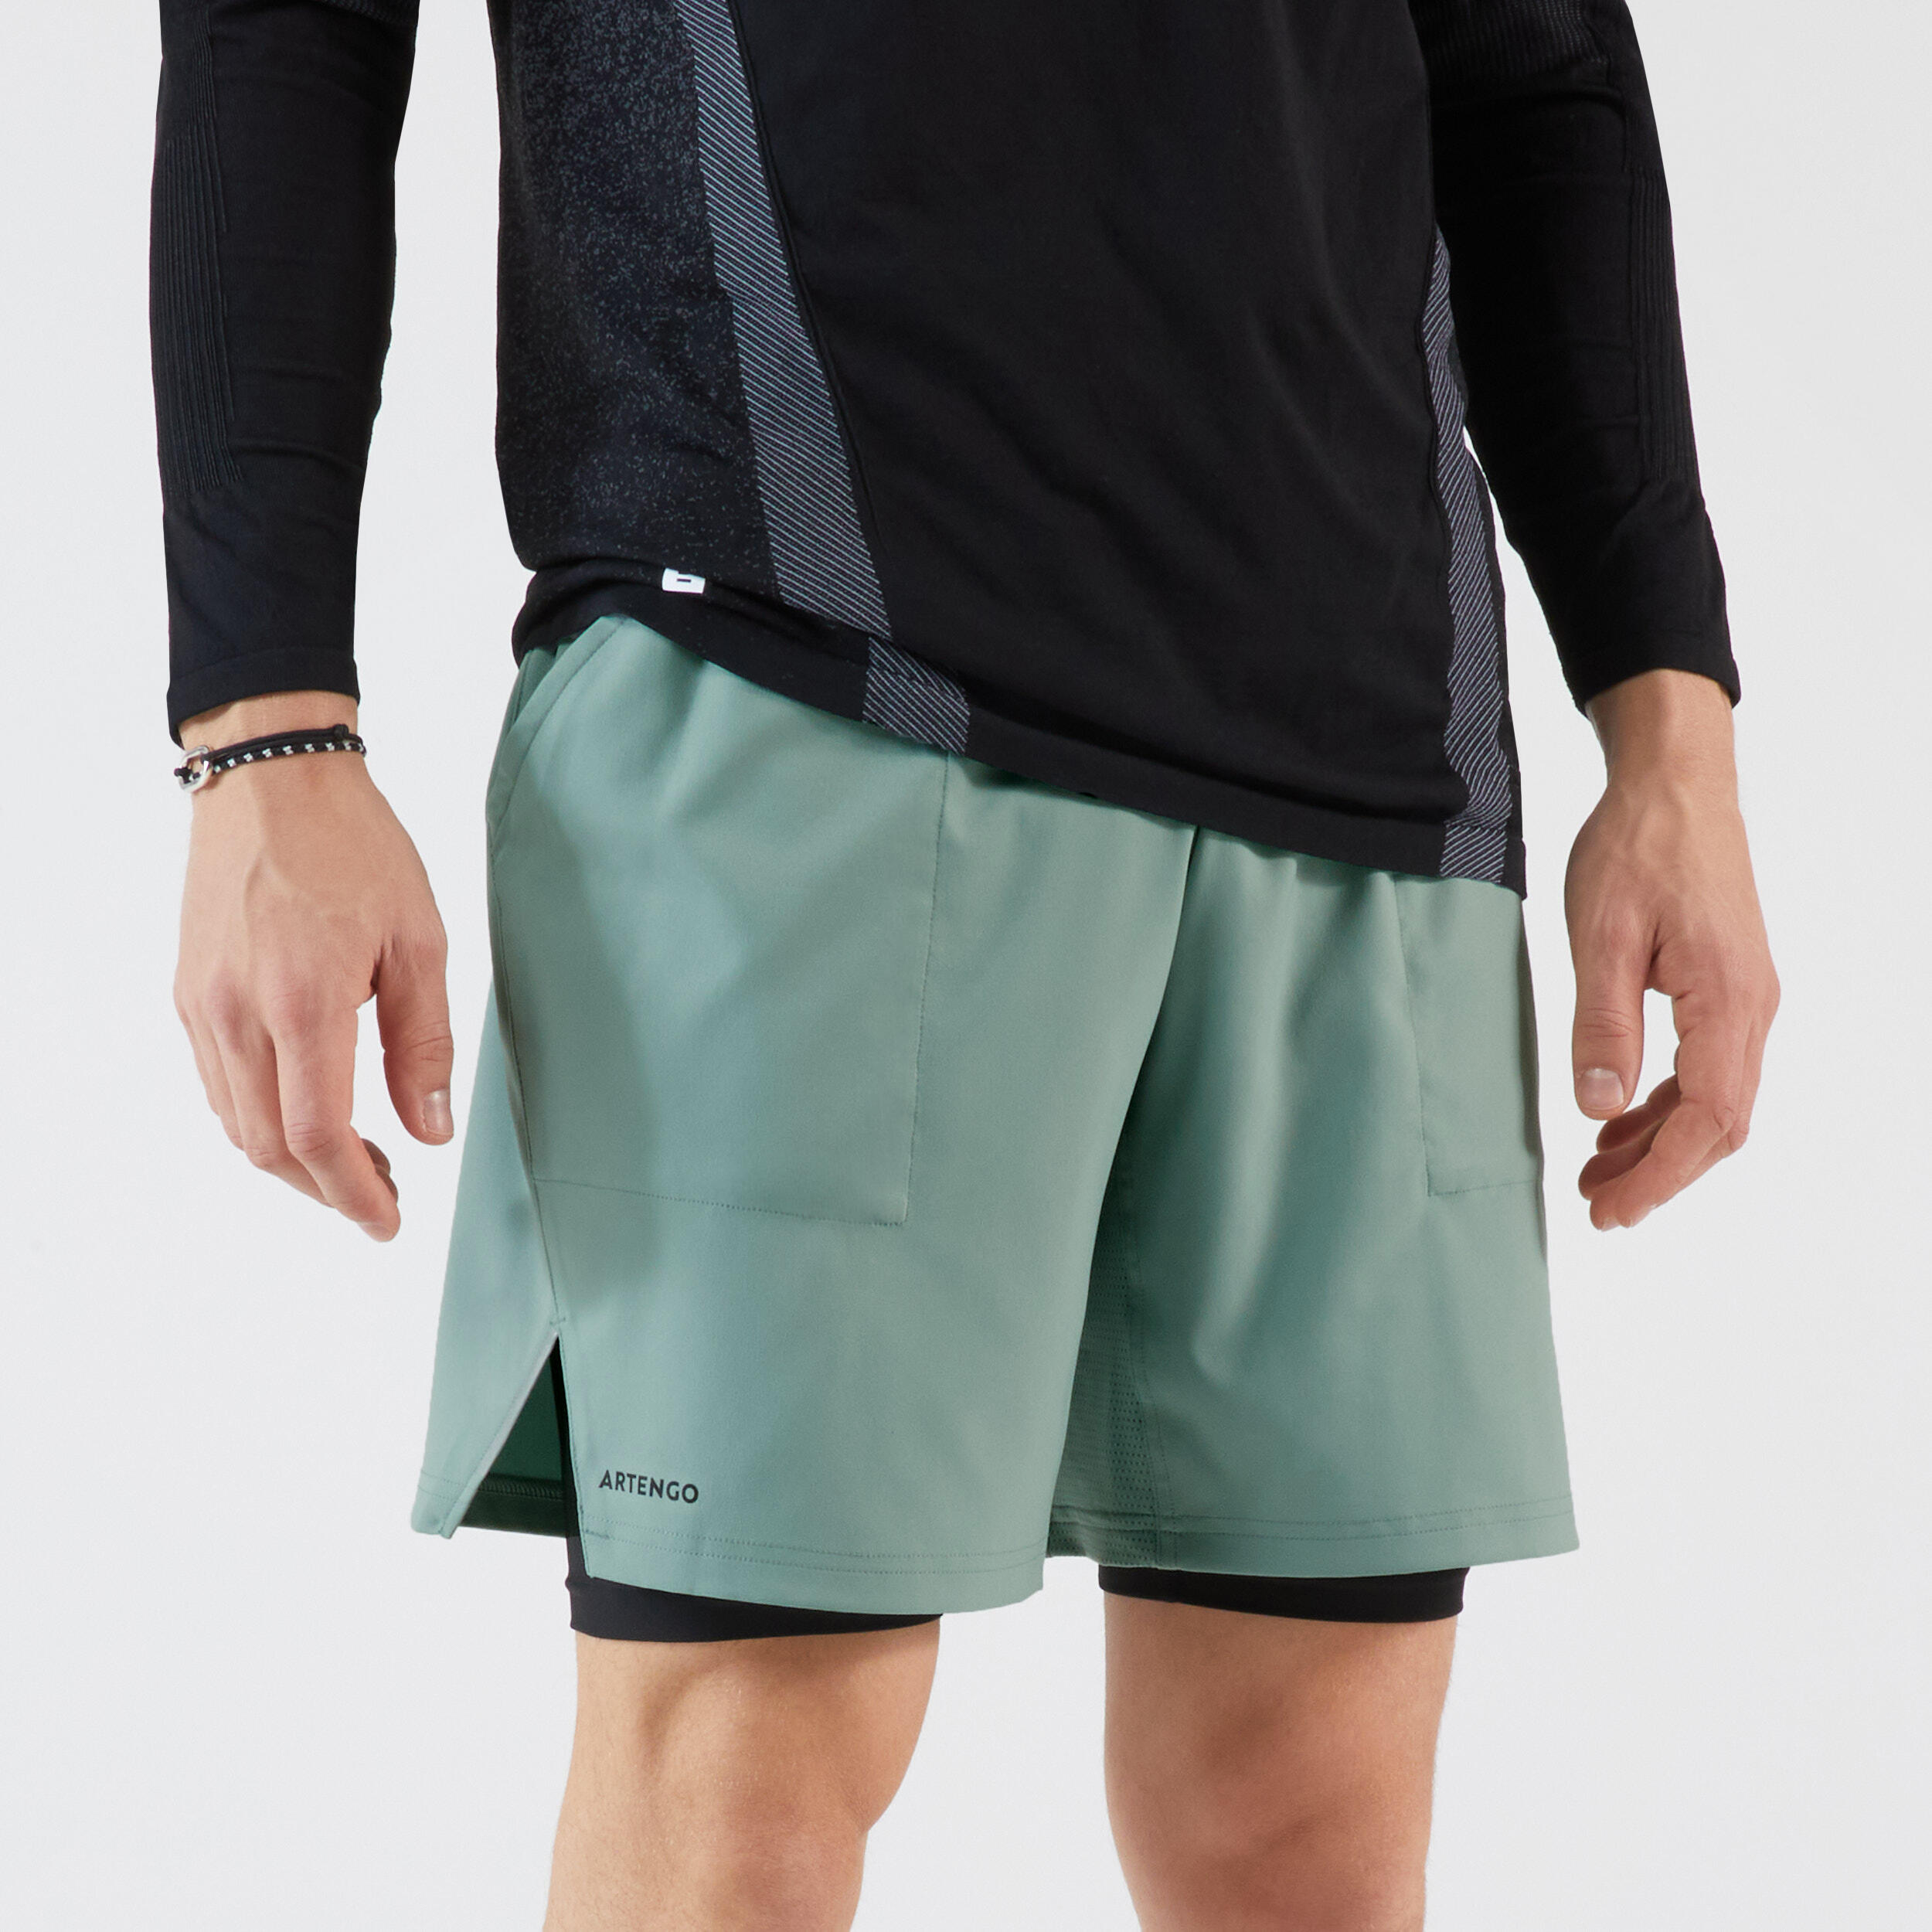 Men's Tennis 2-in-1 Shorts and Undershorts Thermic - Greyish Green/Black 4/7